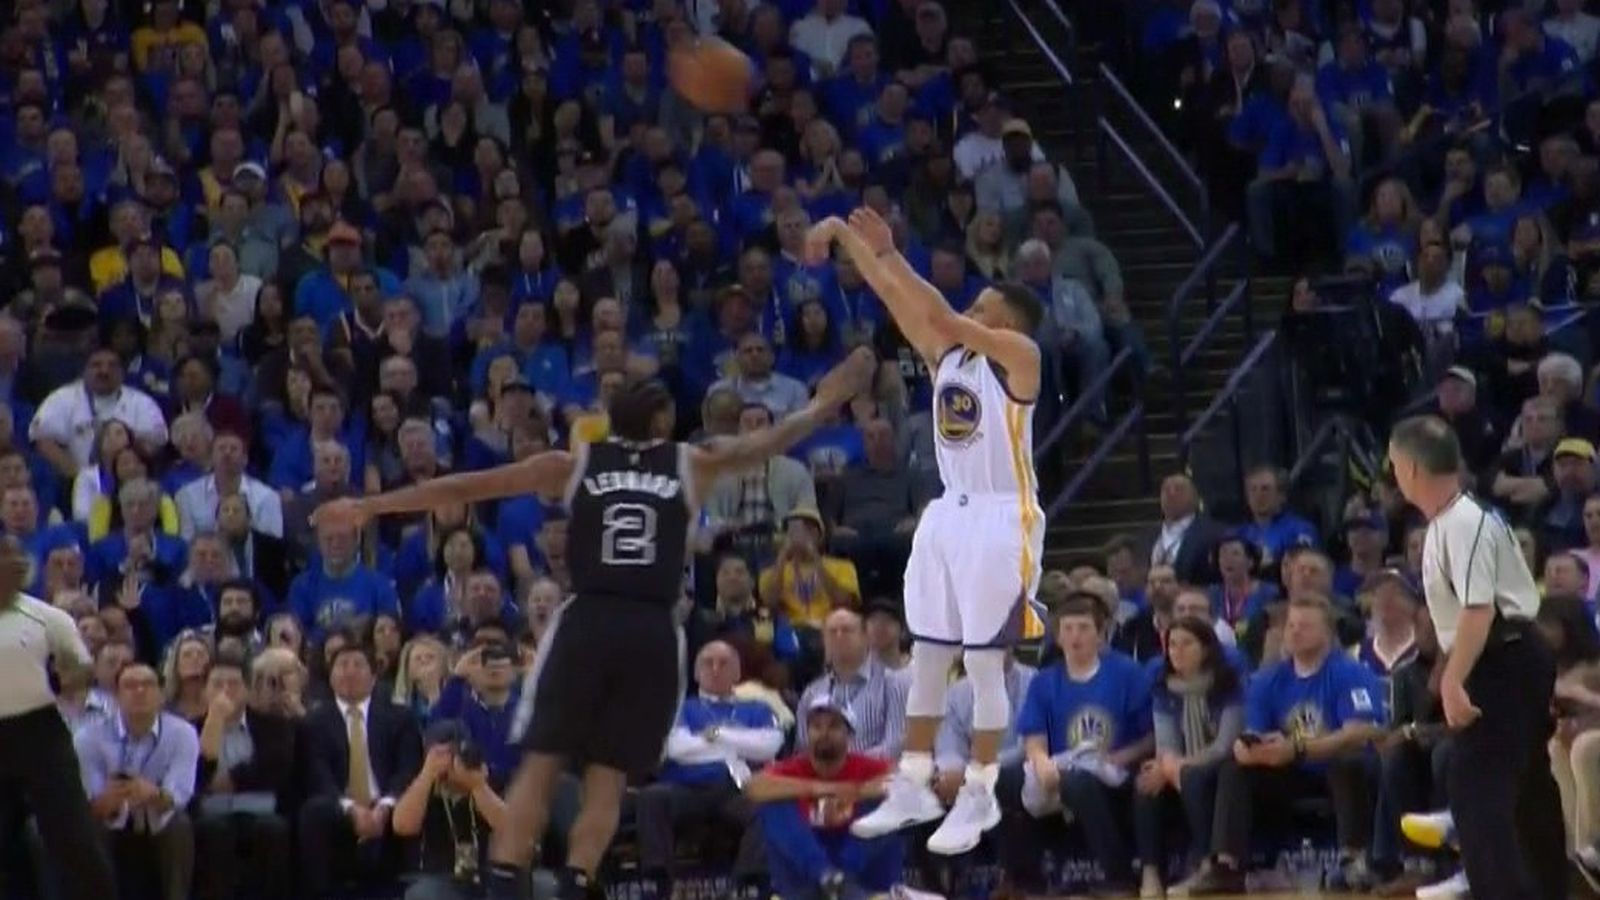 Steph Curry fakes out Kawhi Leonard & buries the 3-pointer